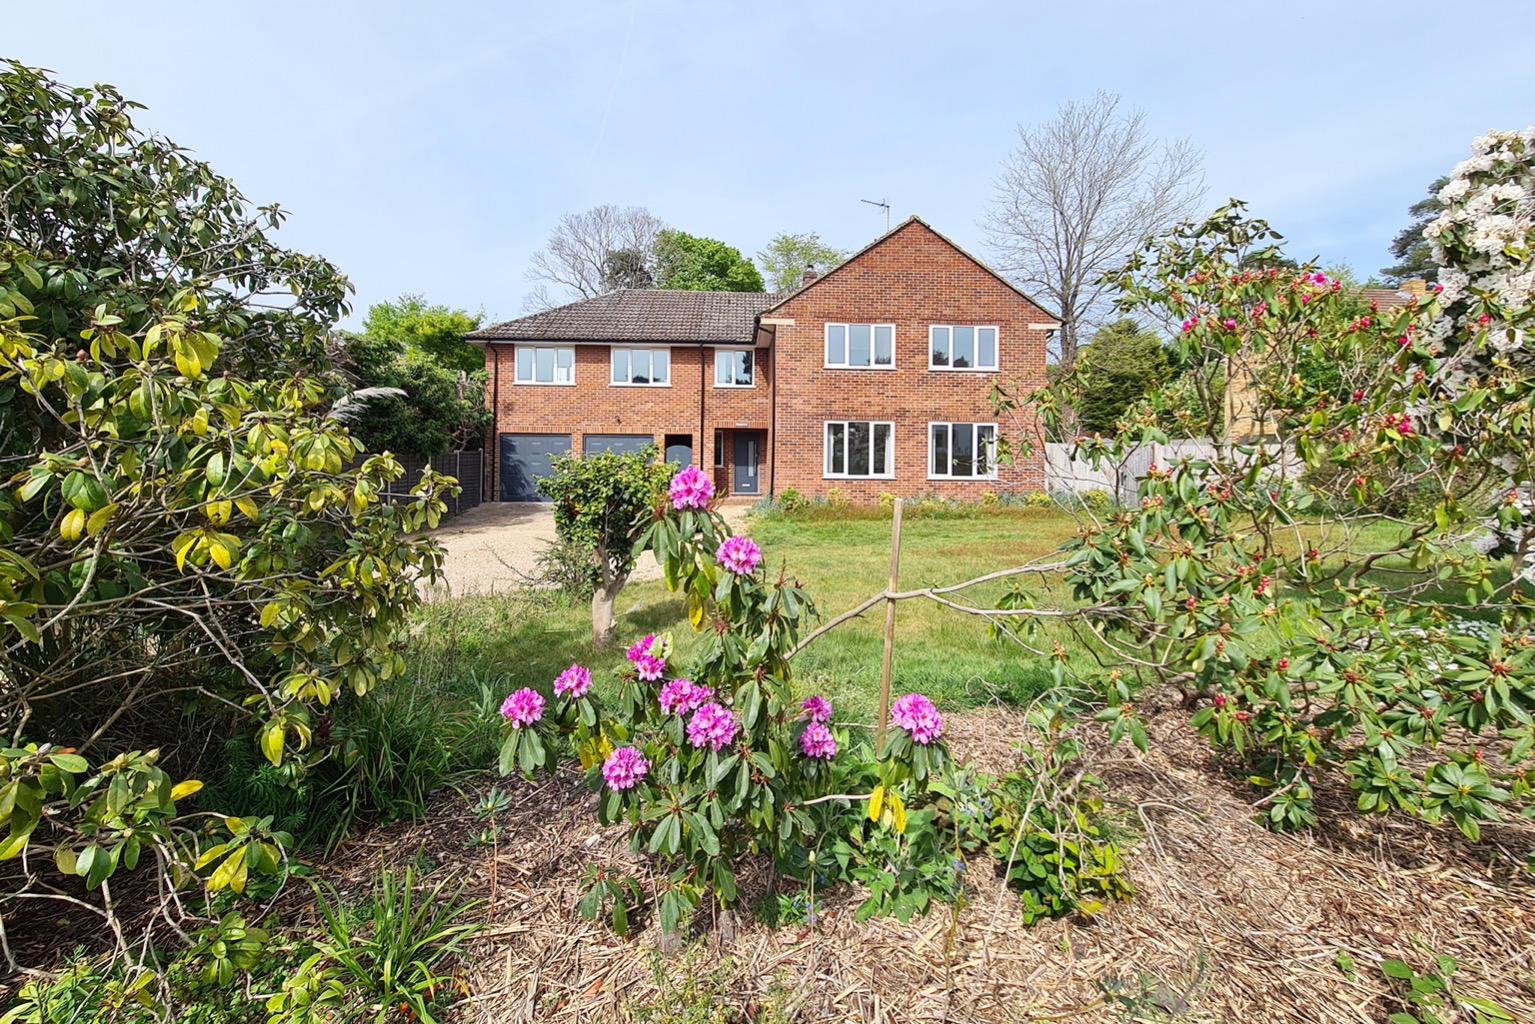 Welcome to Busketts, a substantial family home with accommodation in excess of 3100 sqft and situated in one of Camberley's most sought-after roads on a plot of just under a third of an acre